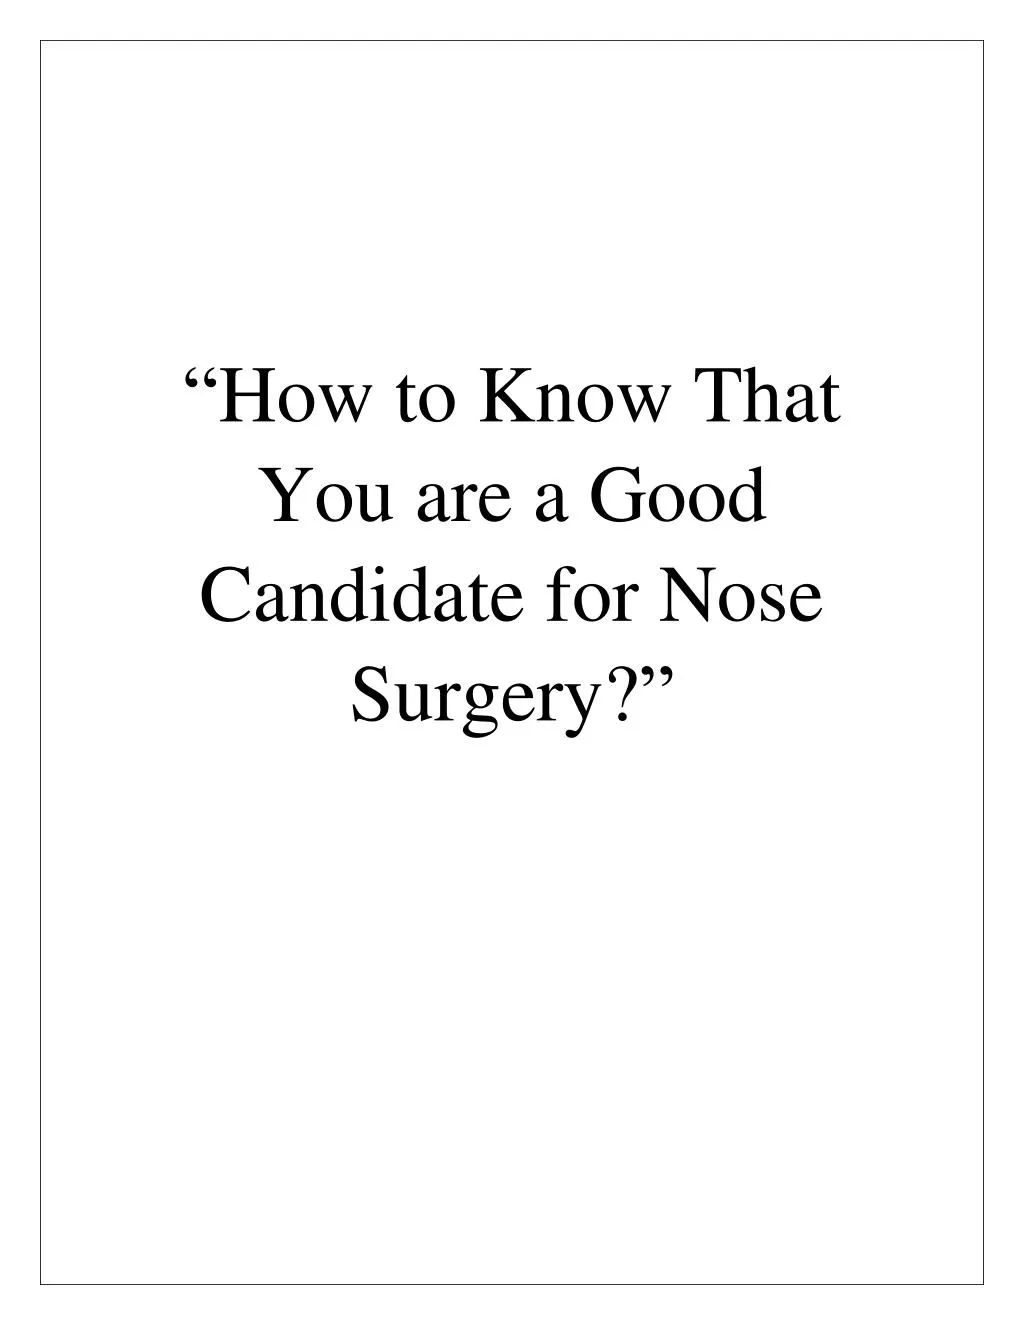 how to know that you are a good candidate